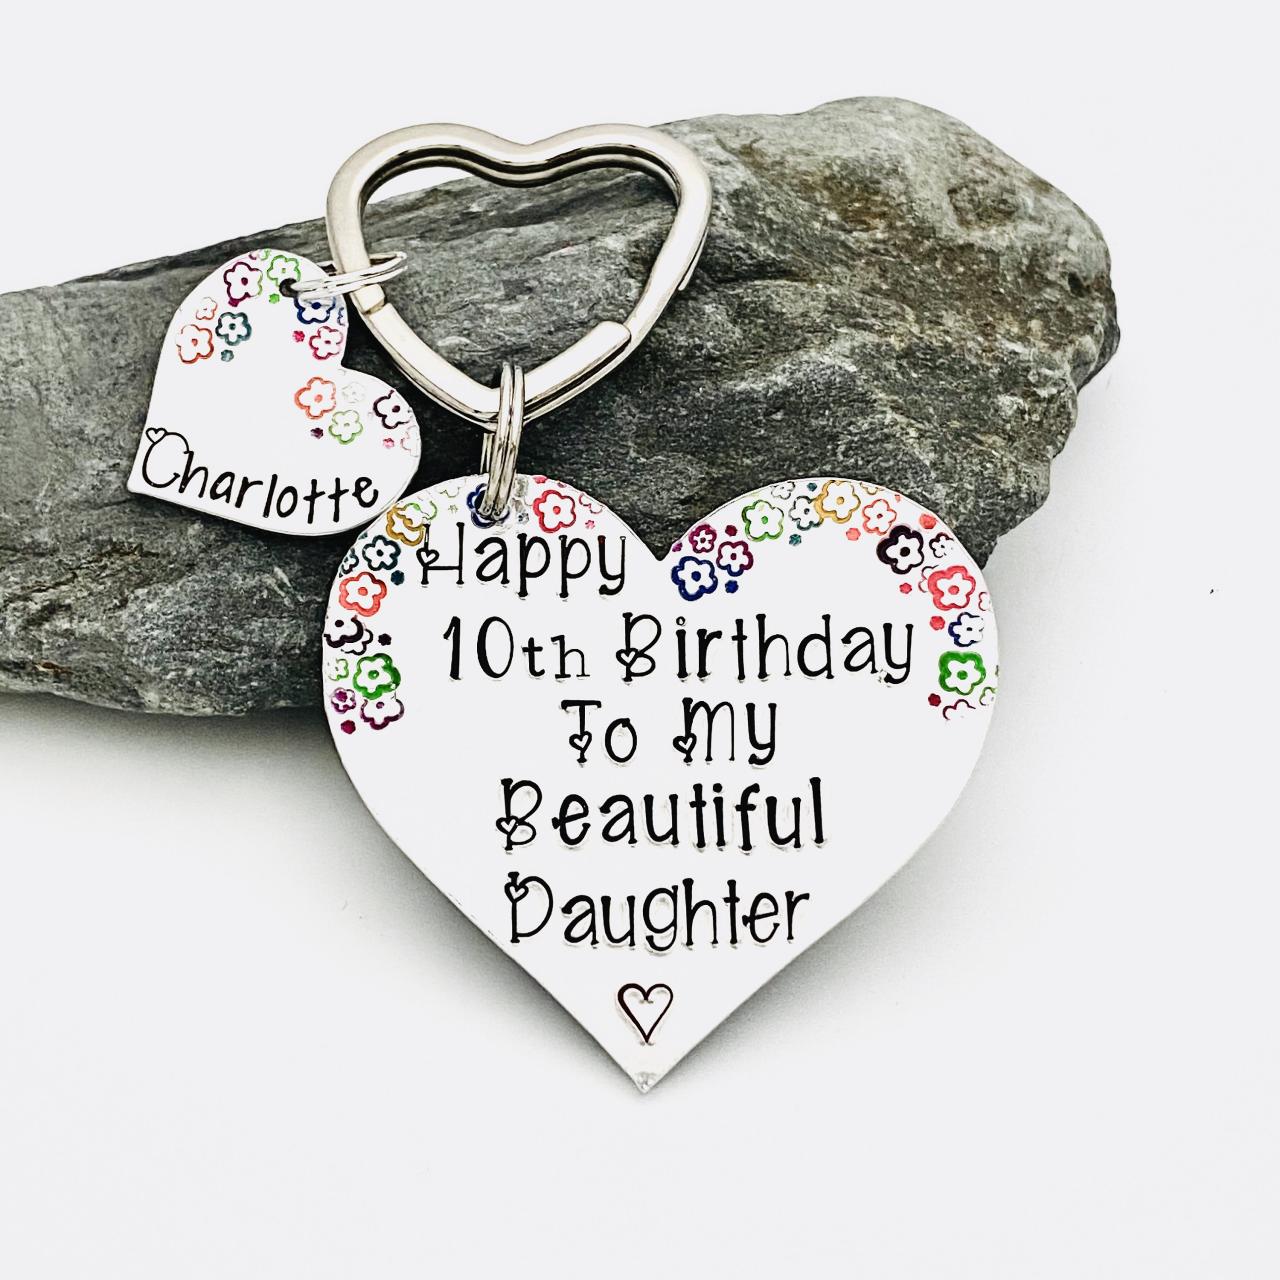 Personalised Birthday Keyring For Daughter, 10th 18th Birthday Gift, Heart Keychain, Personalized Daughter keychain, Special Birthday Gift